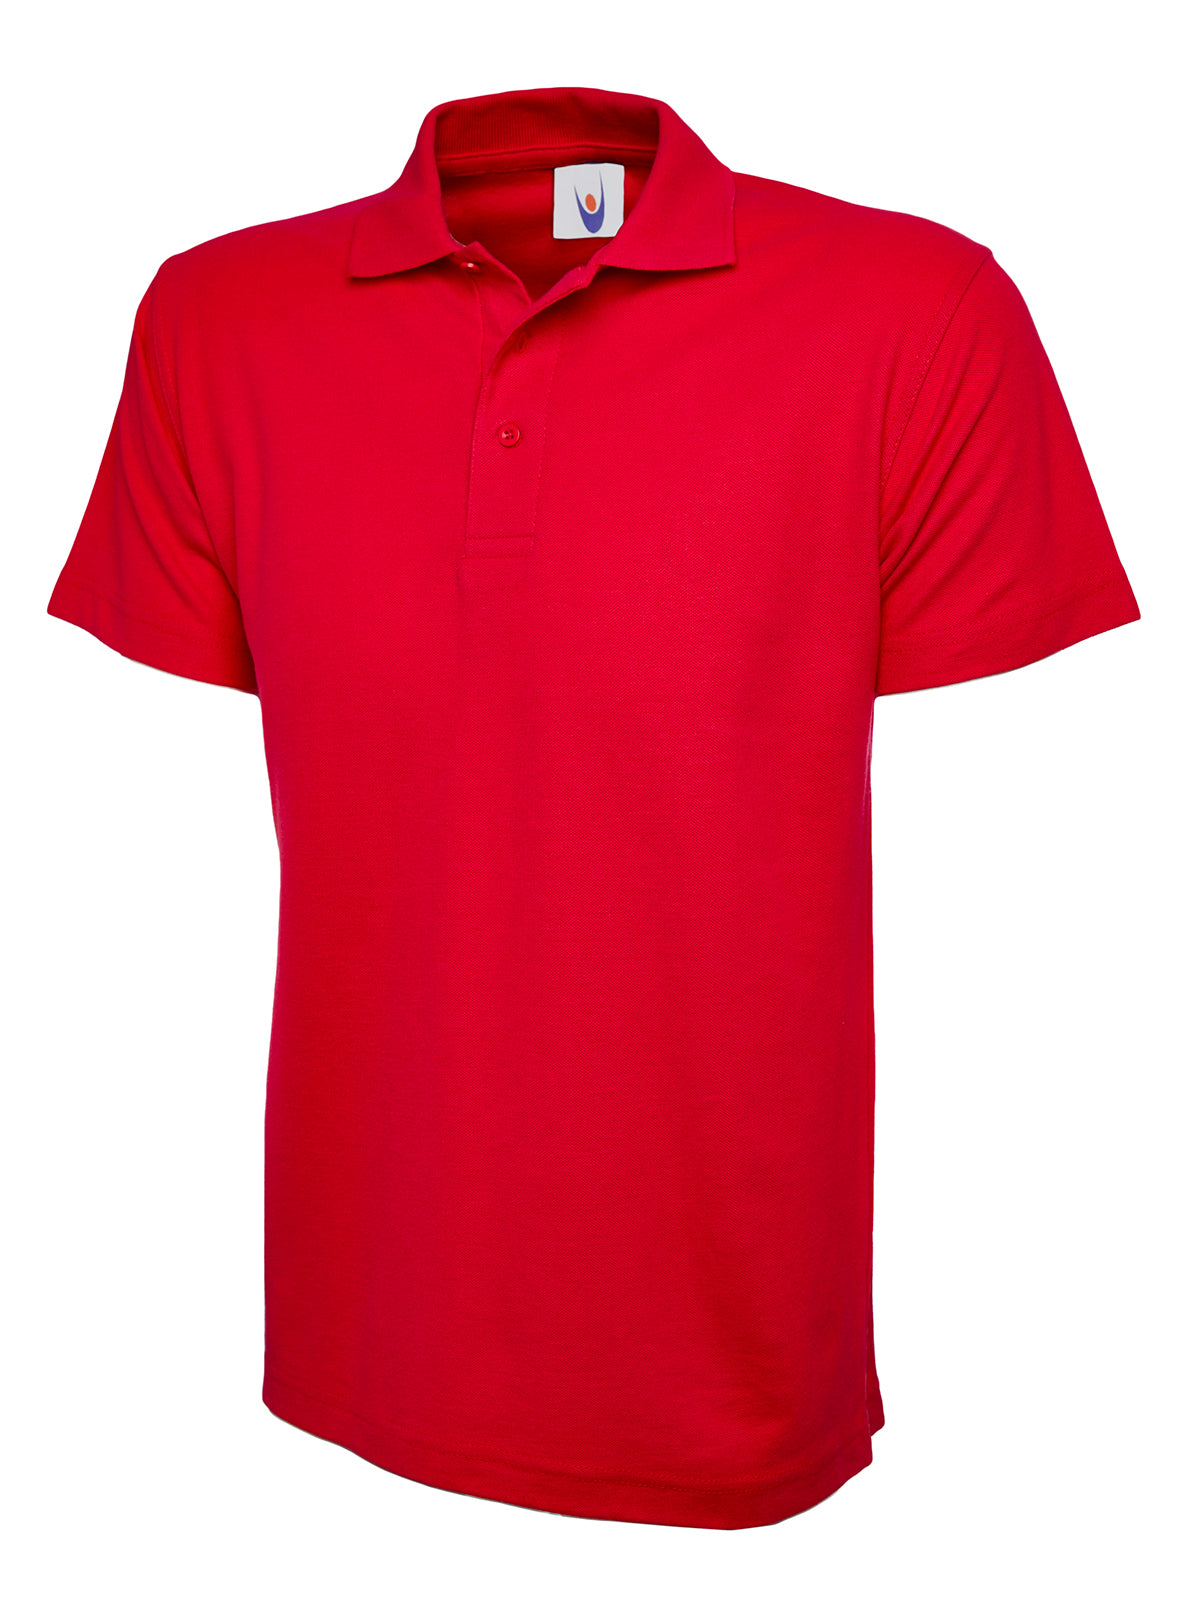 Uneek Classic Unisex Work Polo Shirt UC101 - Red